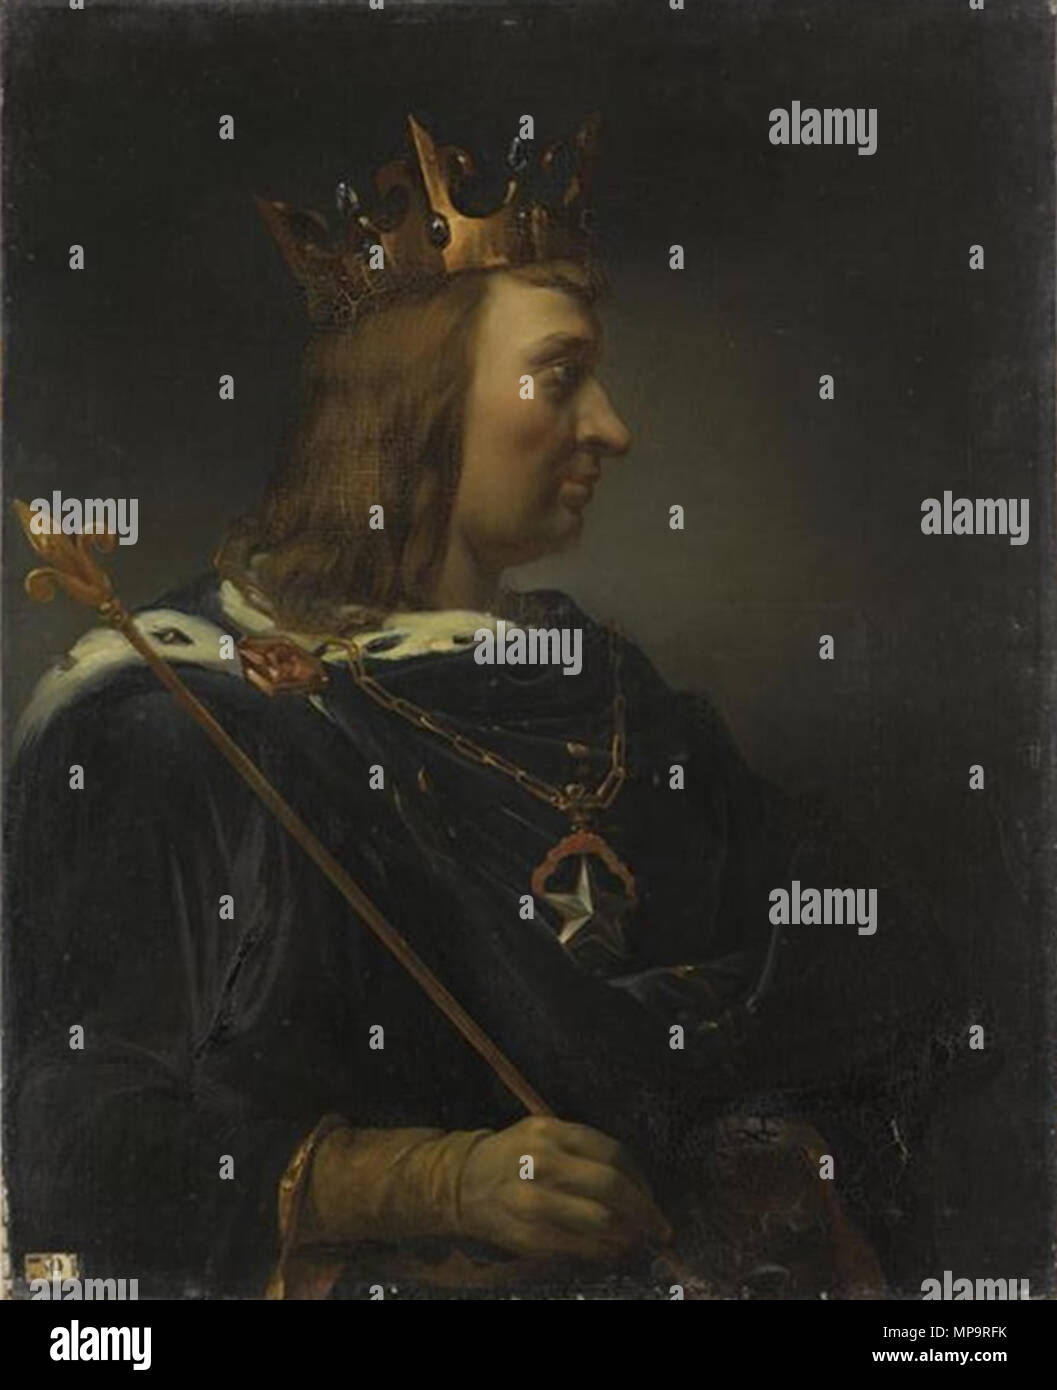 Français : Jean II le Bon (1319-1364), roi de France .   Portraits of Kings of France is a serie of portraits commissioned between 1837 and 1838 by Louis Philippe I and painted by various artists for the Musée historique de Versailles.  . 1837.   833 Lugardon - John II of France Stock Photo